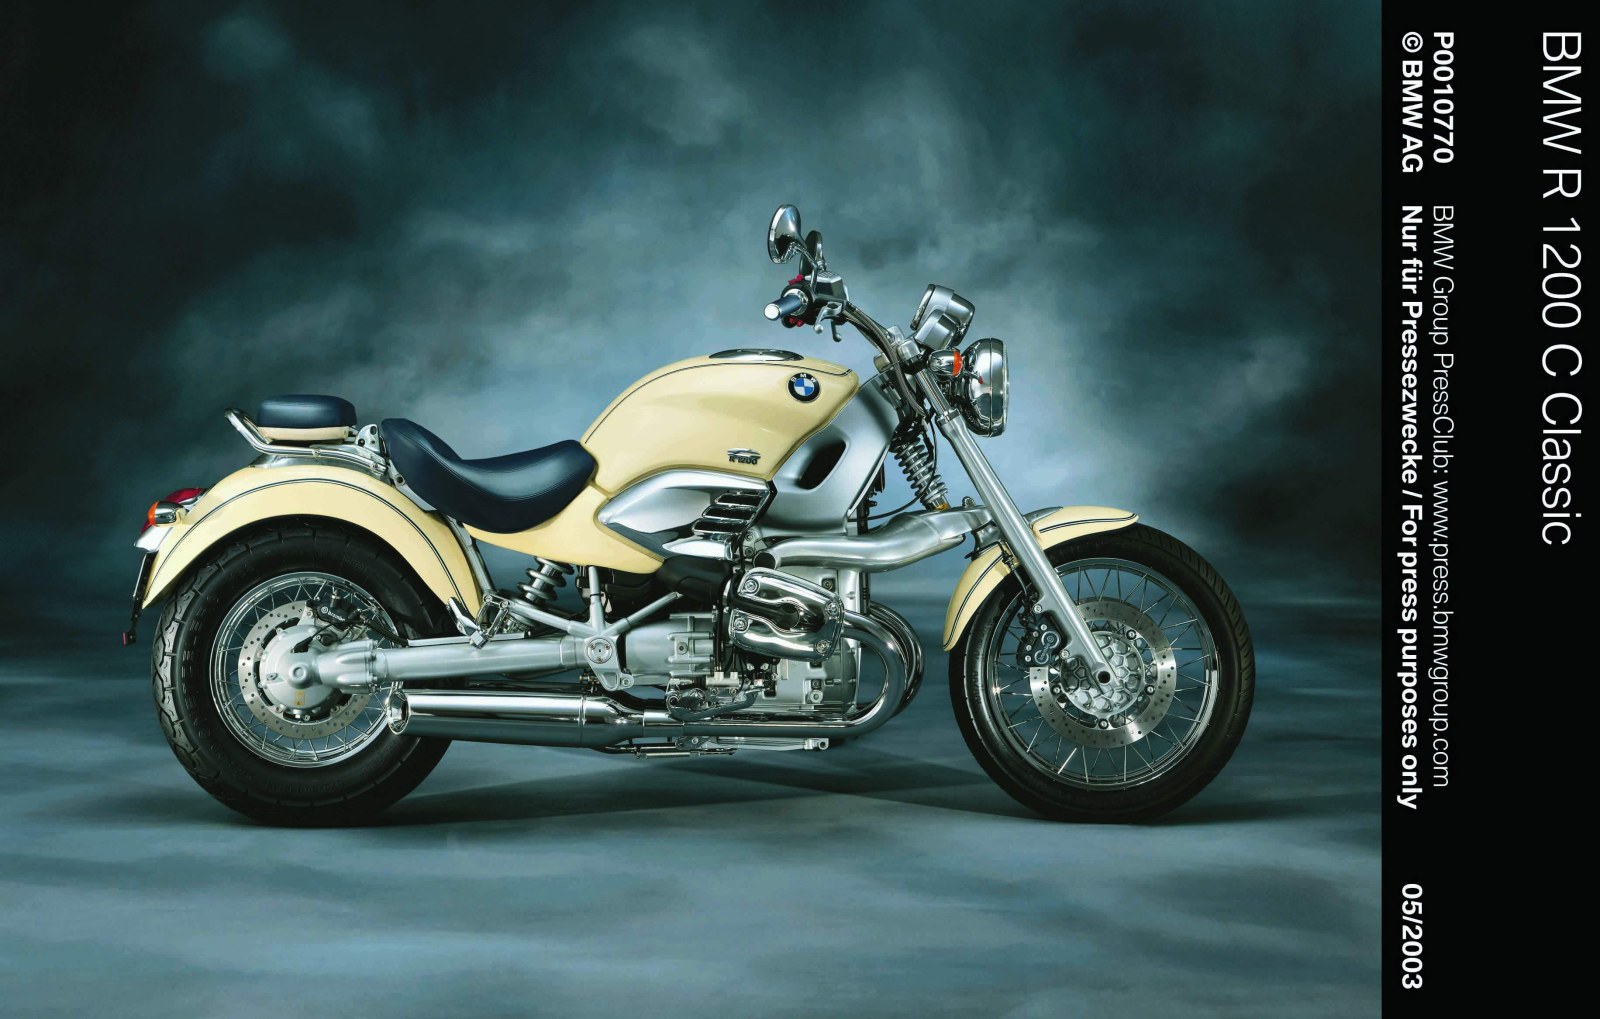 Bmw r1200c classic specifications